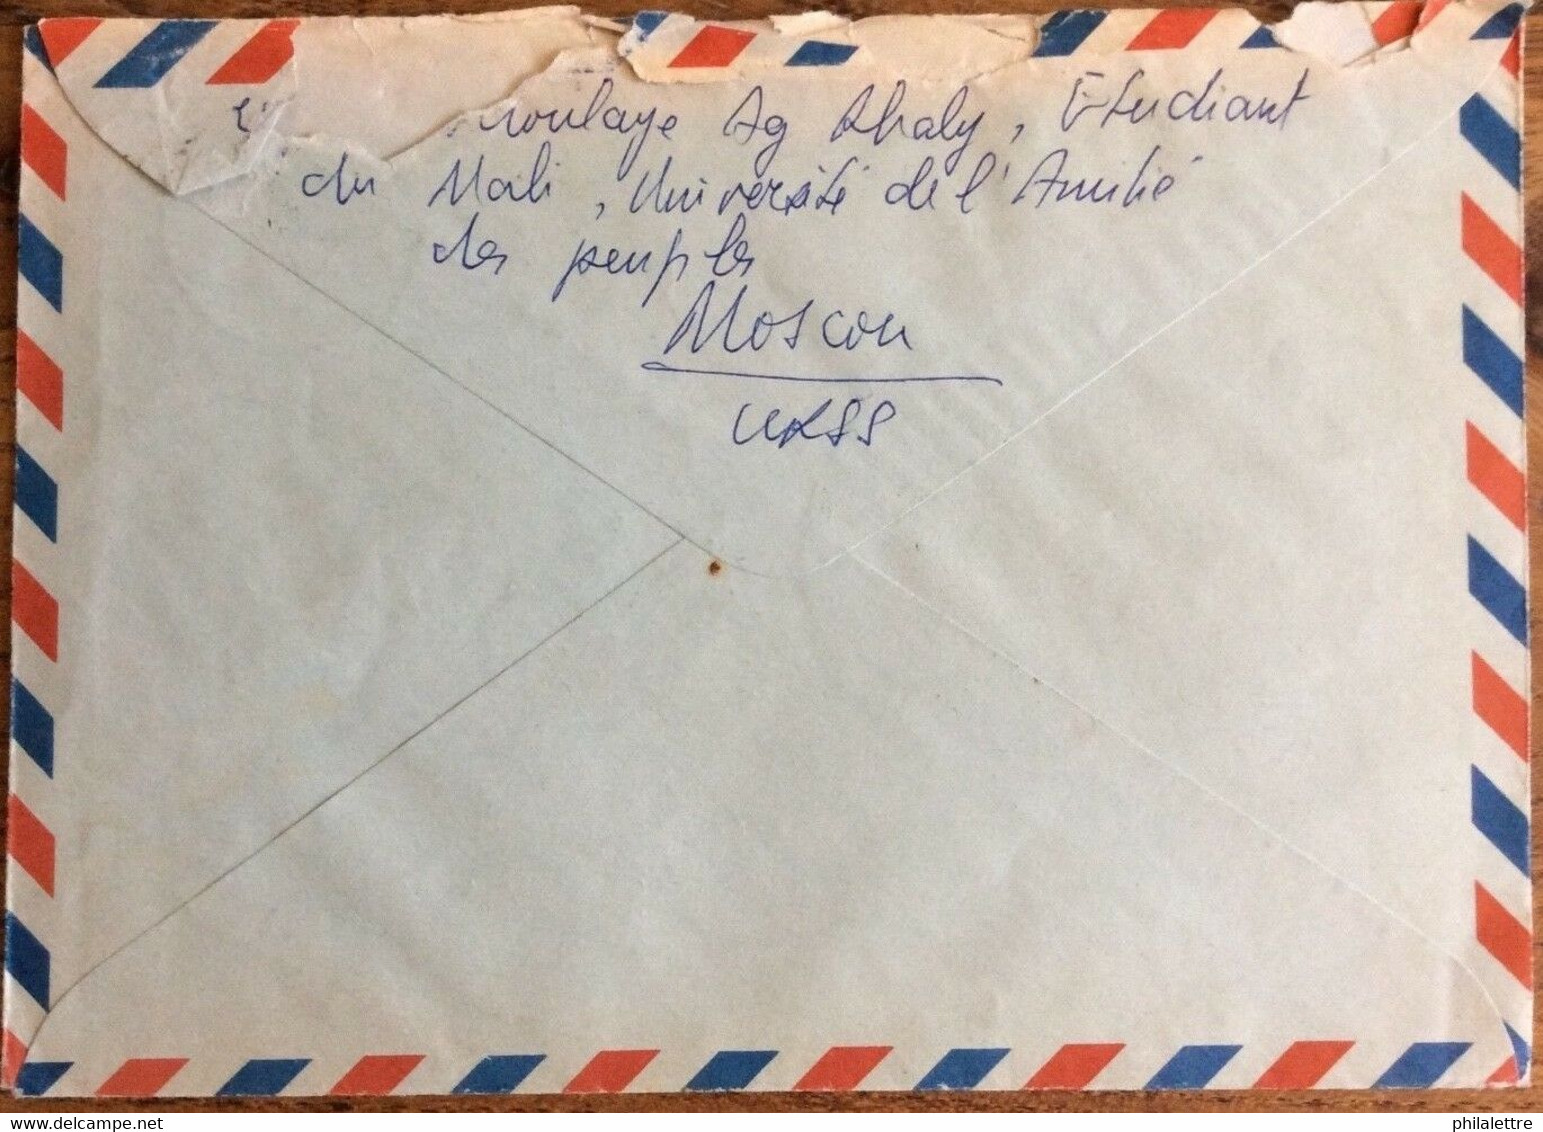 URSS Soviet Union - Air Mail Postal Cover MOSCOW To France - 1960-69